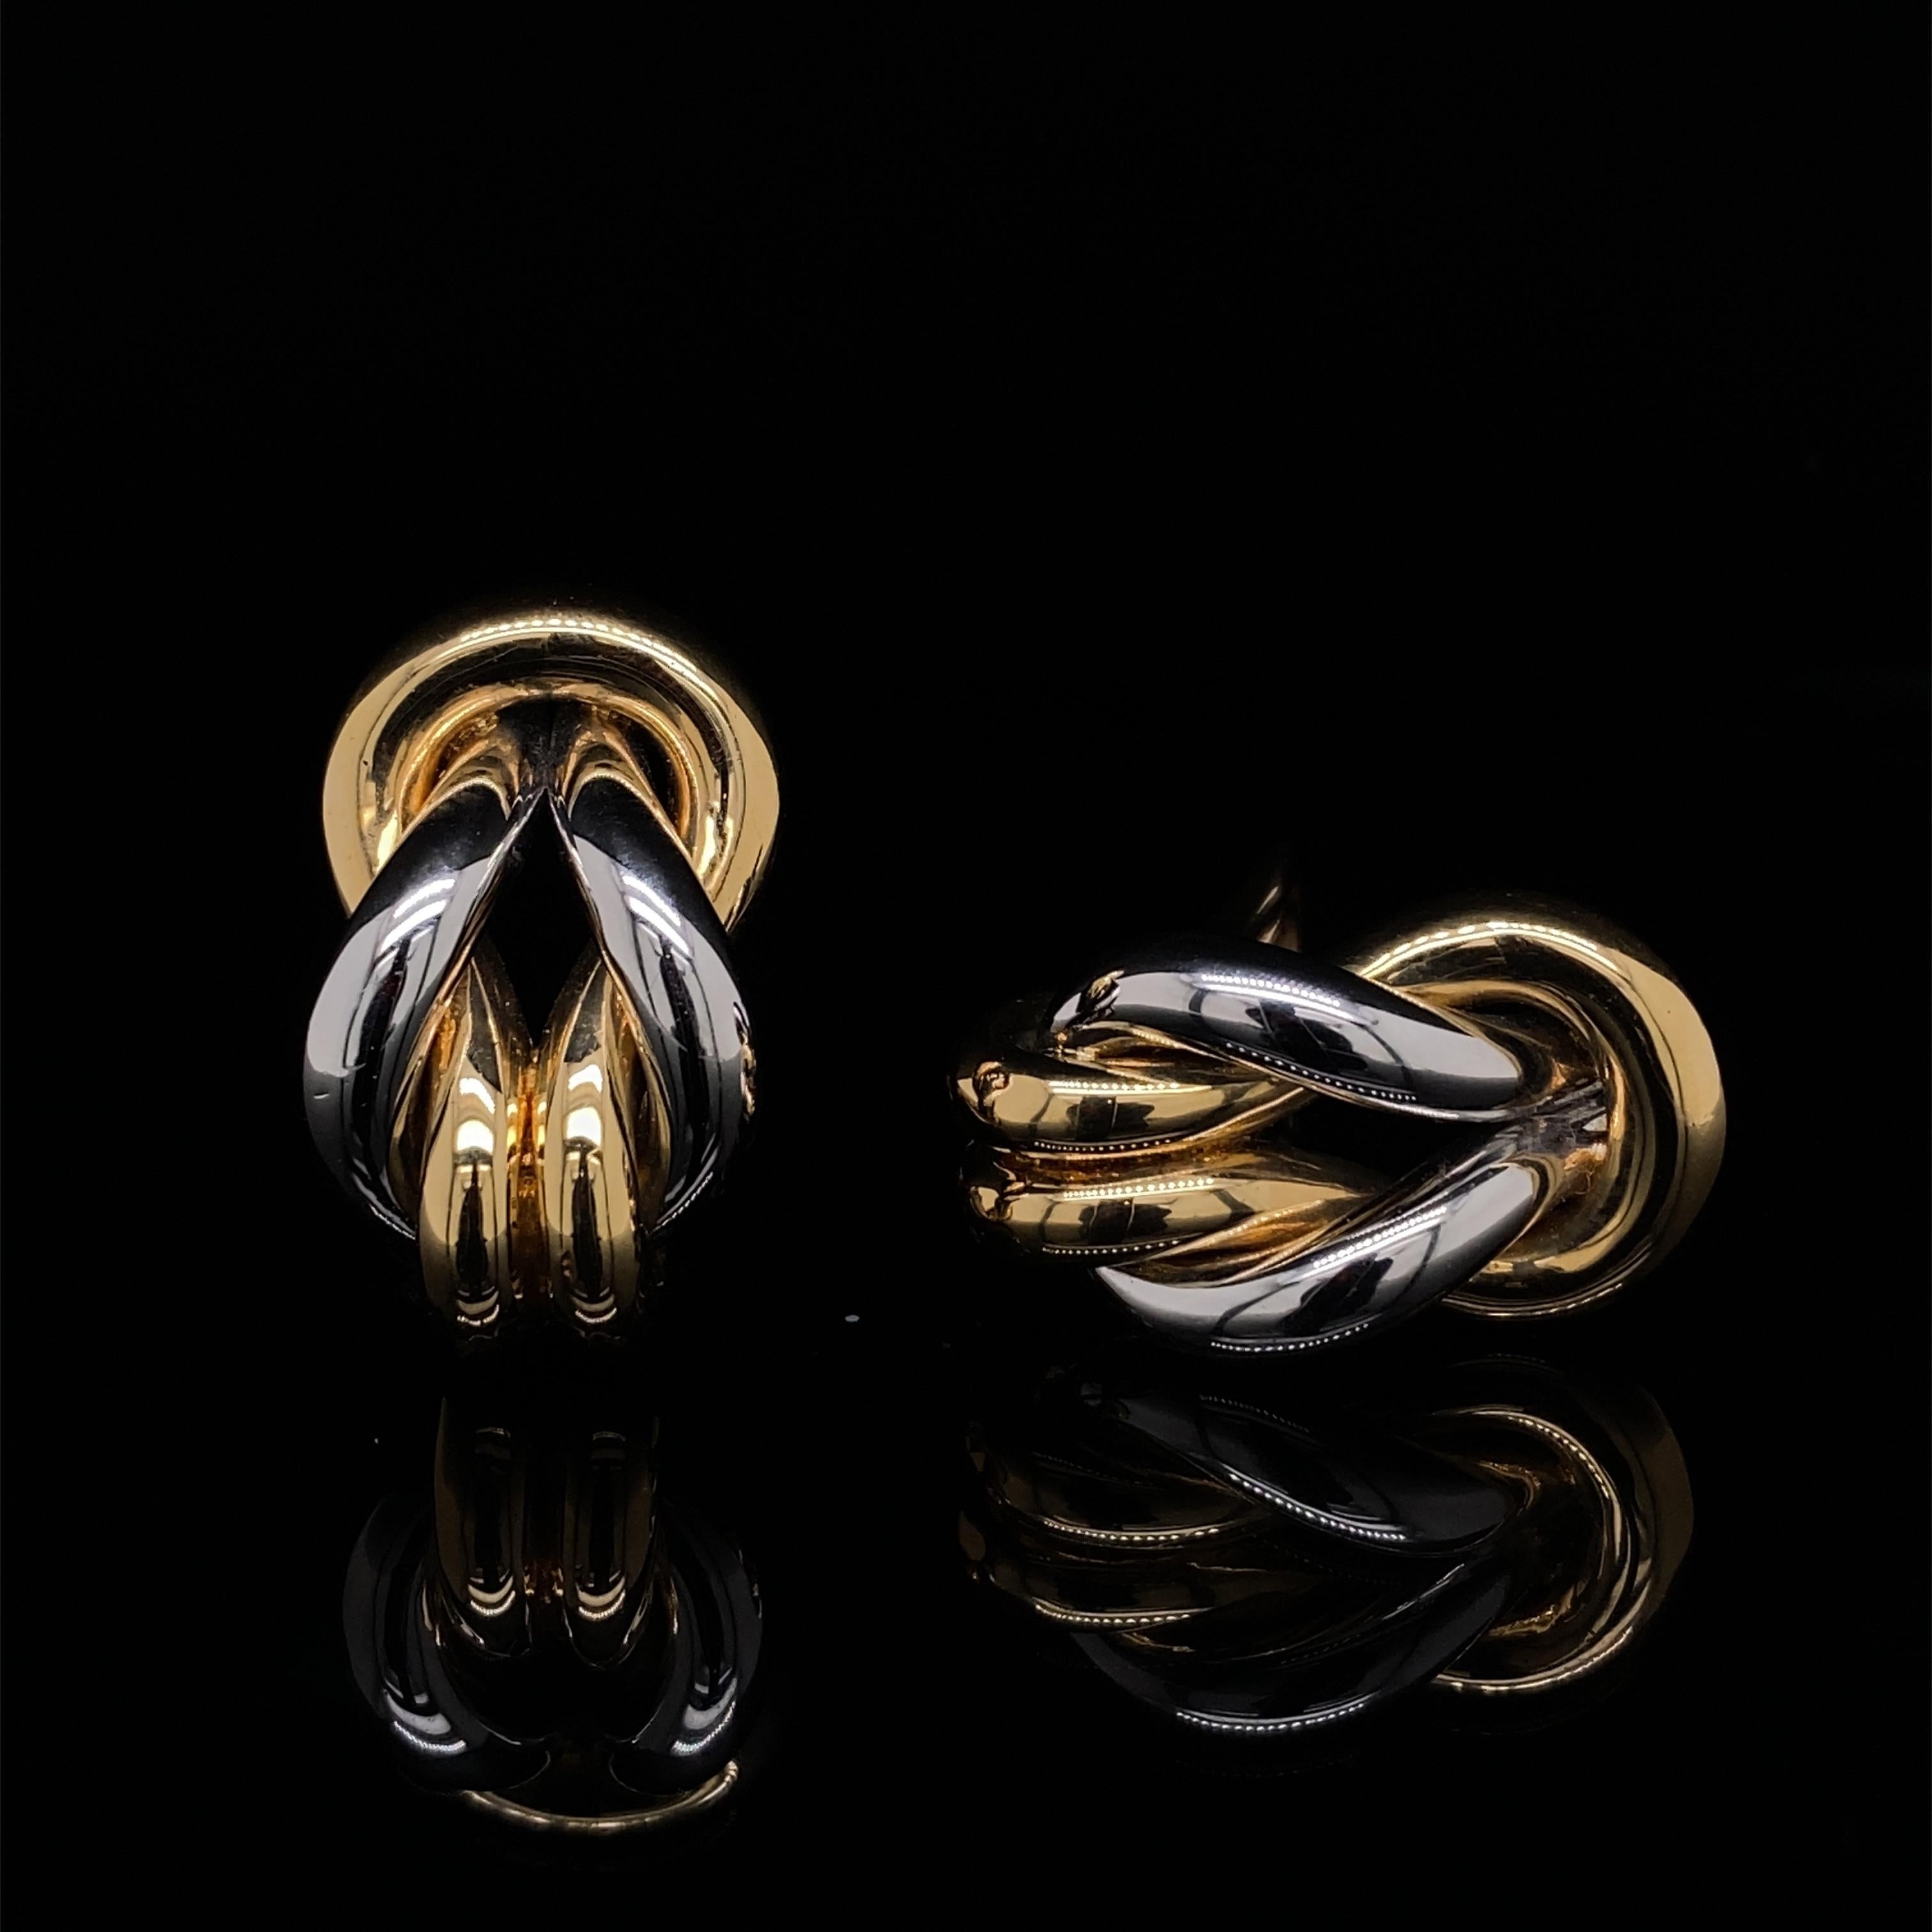 Cartier vintage 18 karat yellow and white gold clip earrings.

A unique pair of vintage Cartier bi-metal 18 karat gold earrings.

Crafted in polished gold, featuring a striking design of two elegant interlocking knots.

Signed on the clip fittings